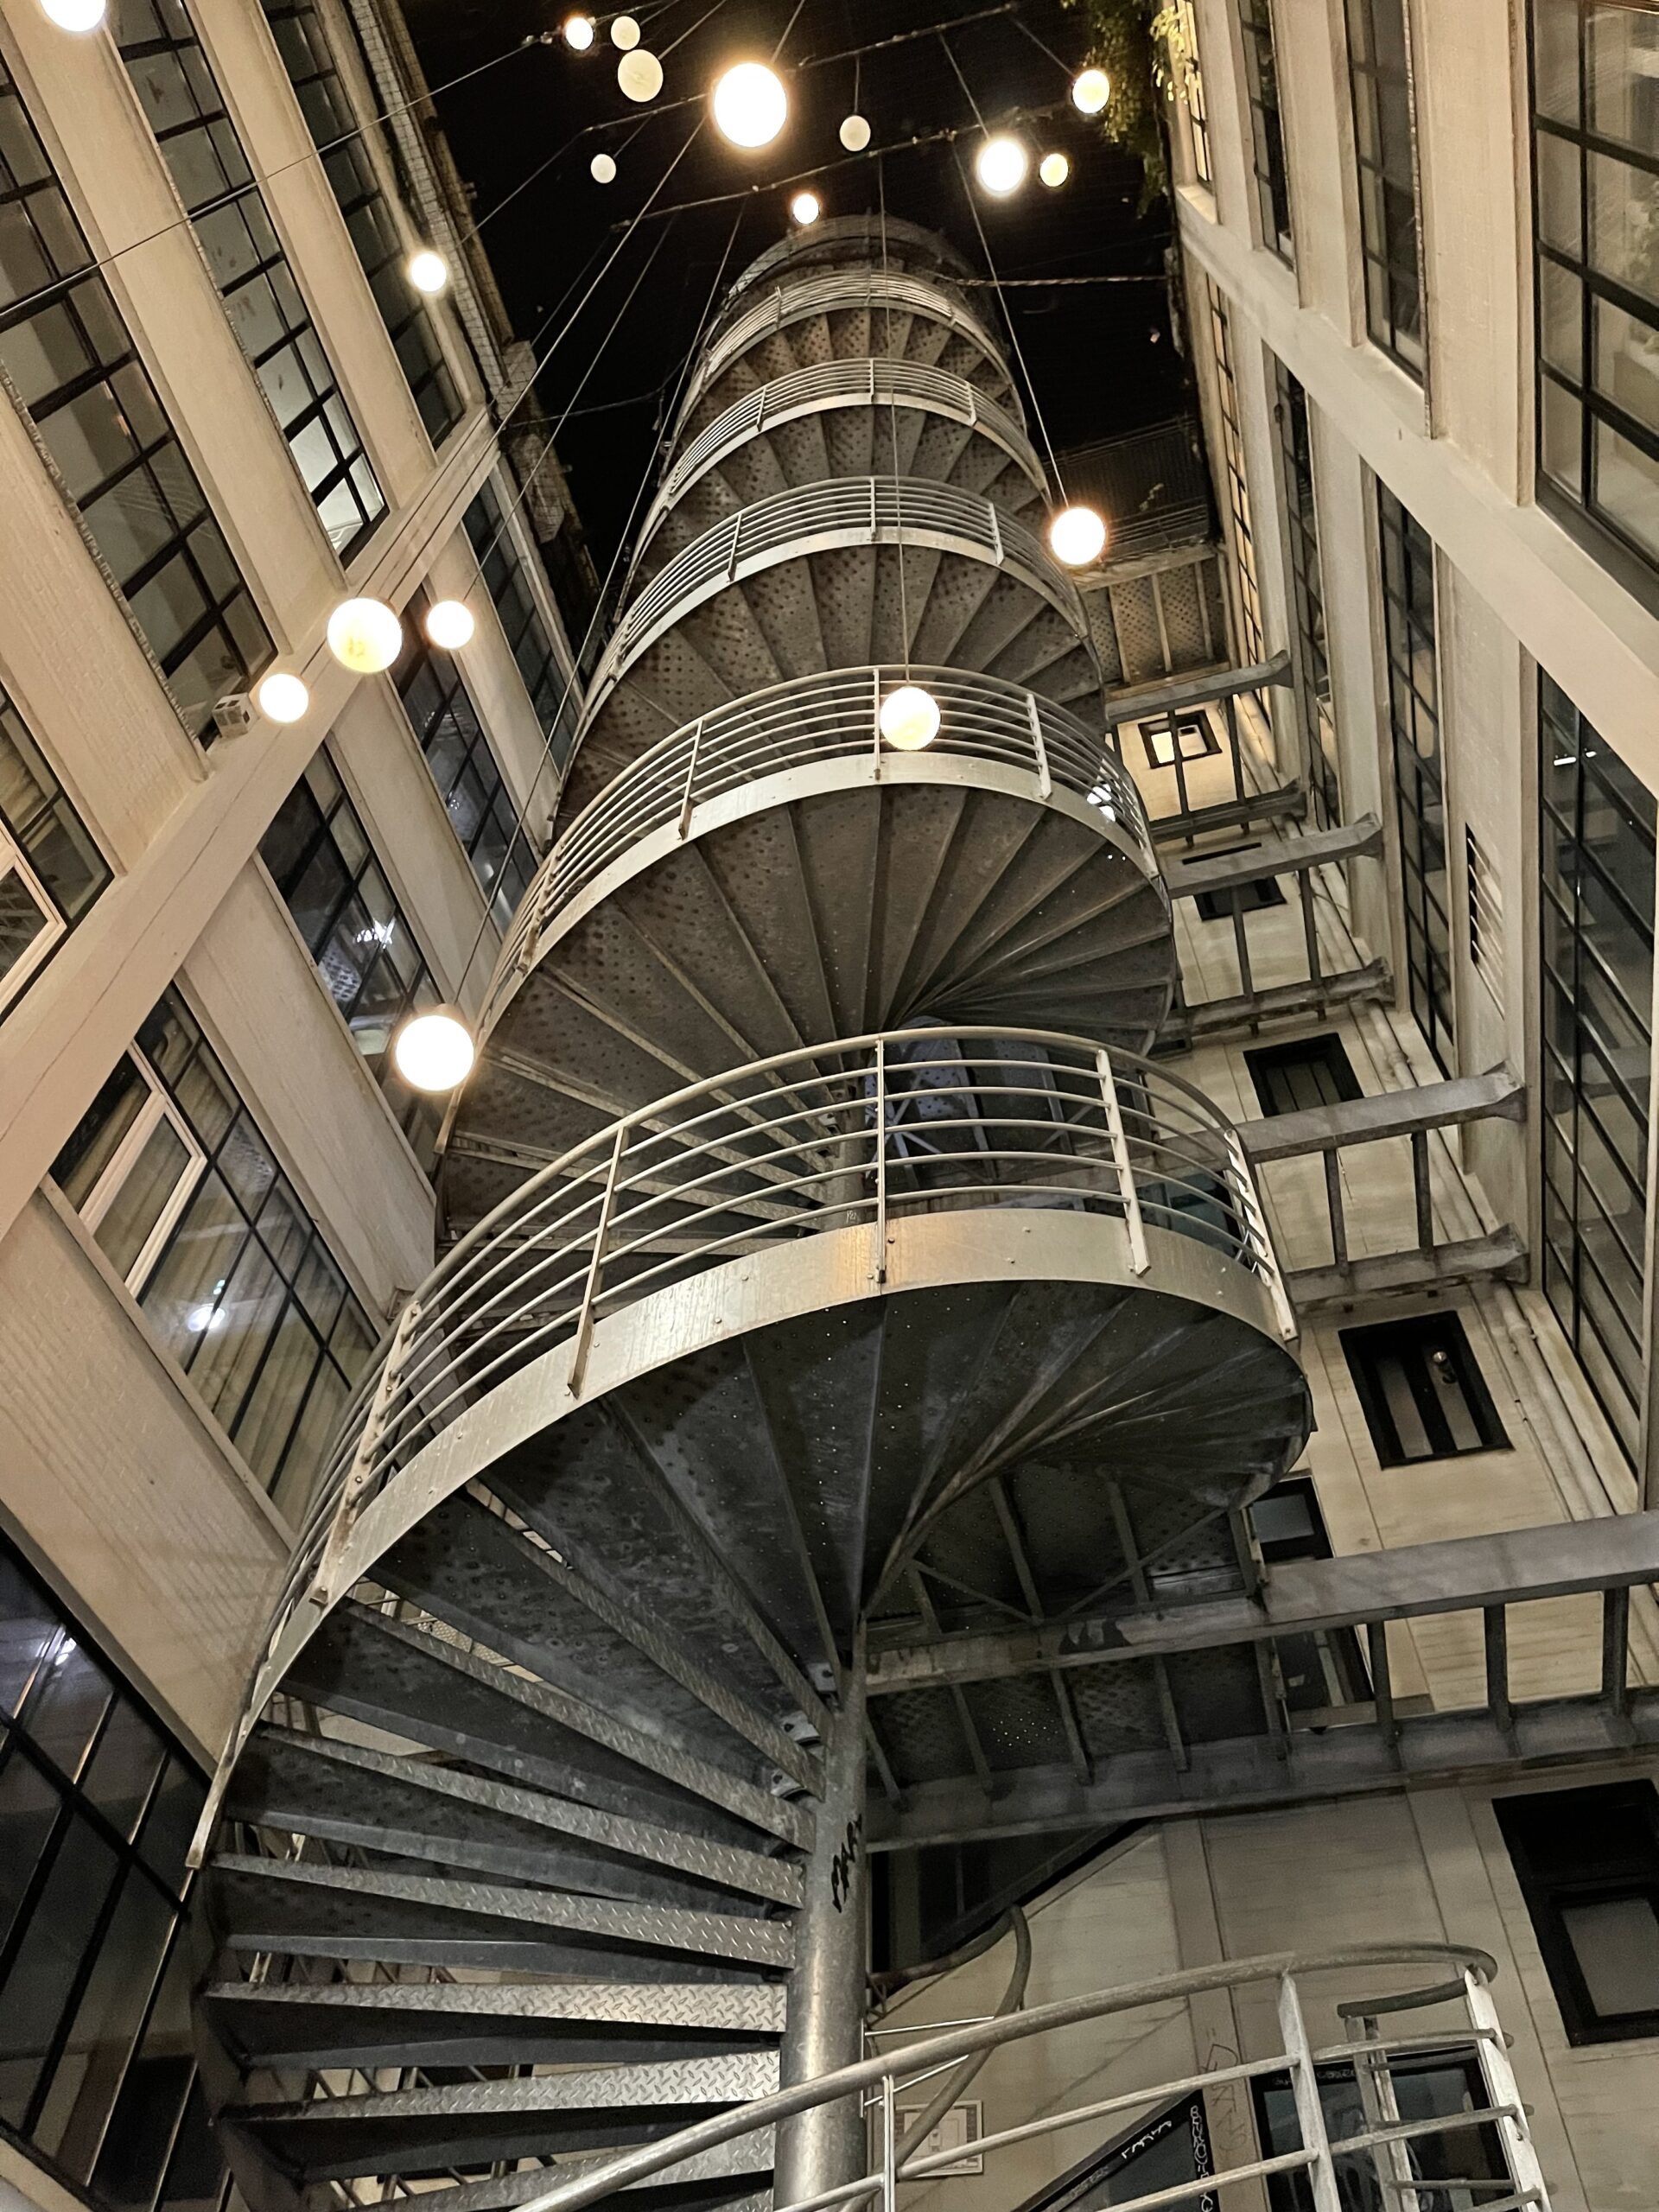 Winding Staircase in Paris